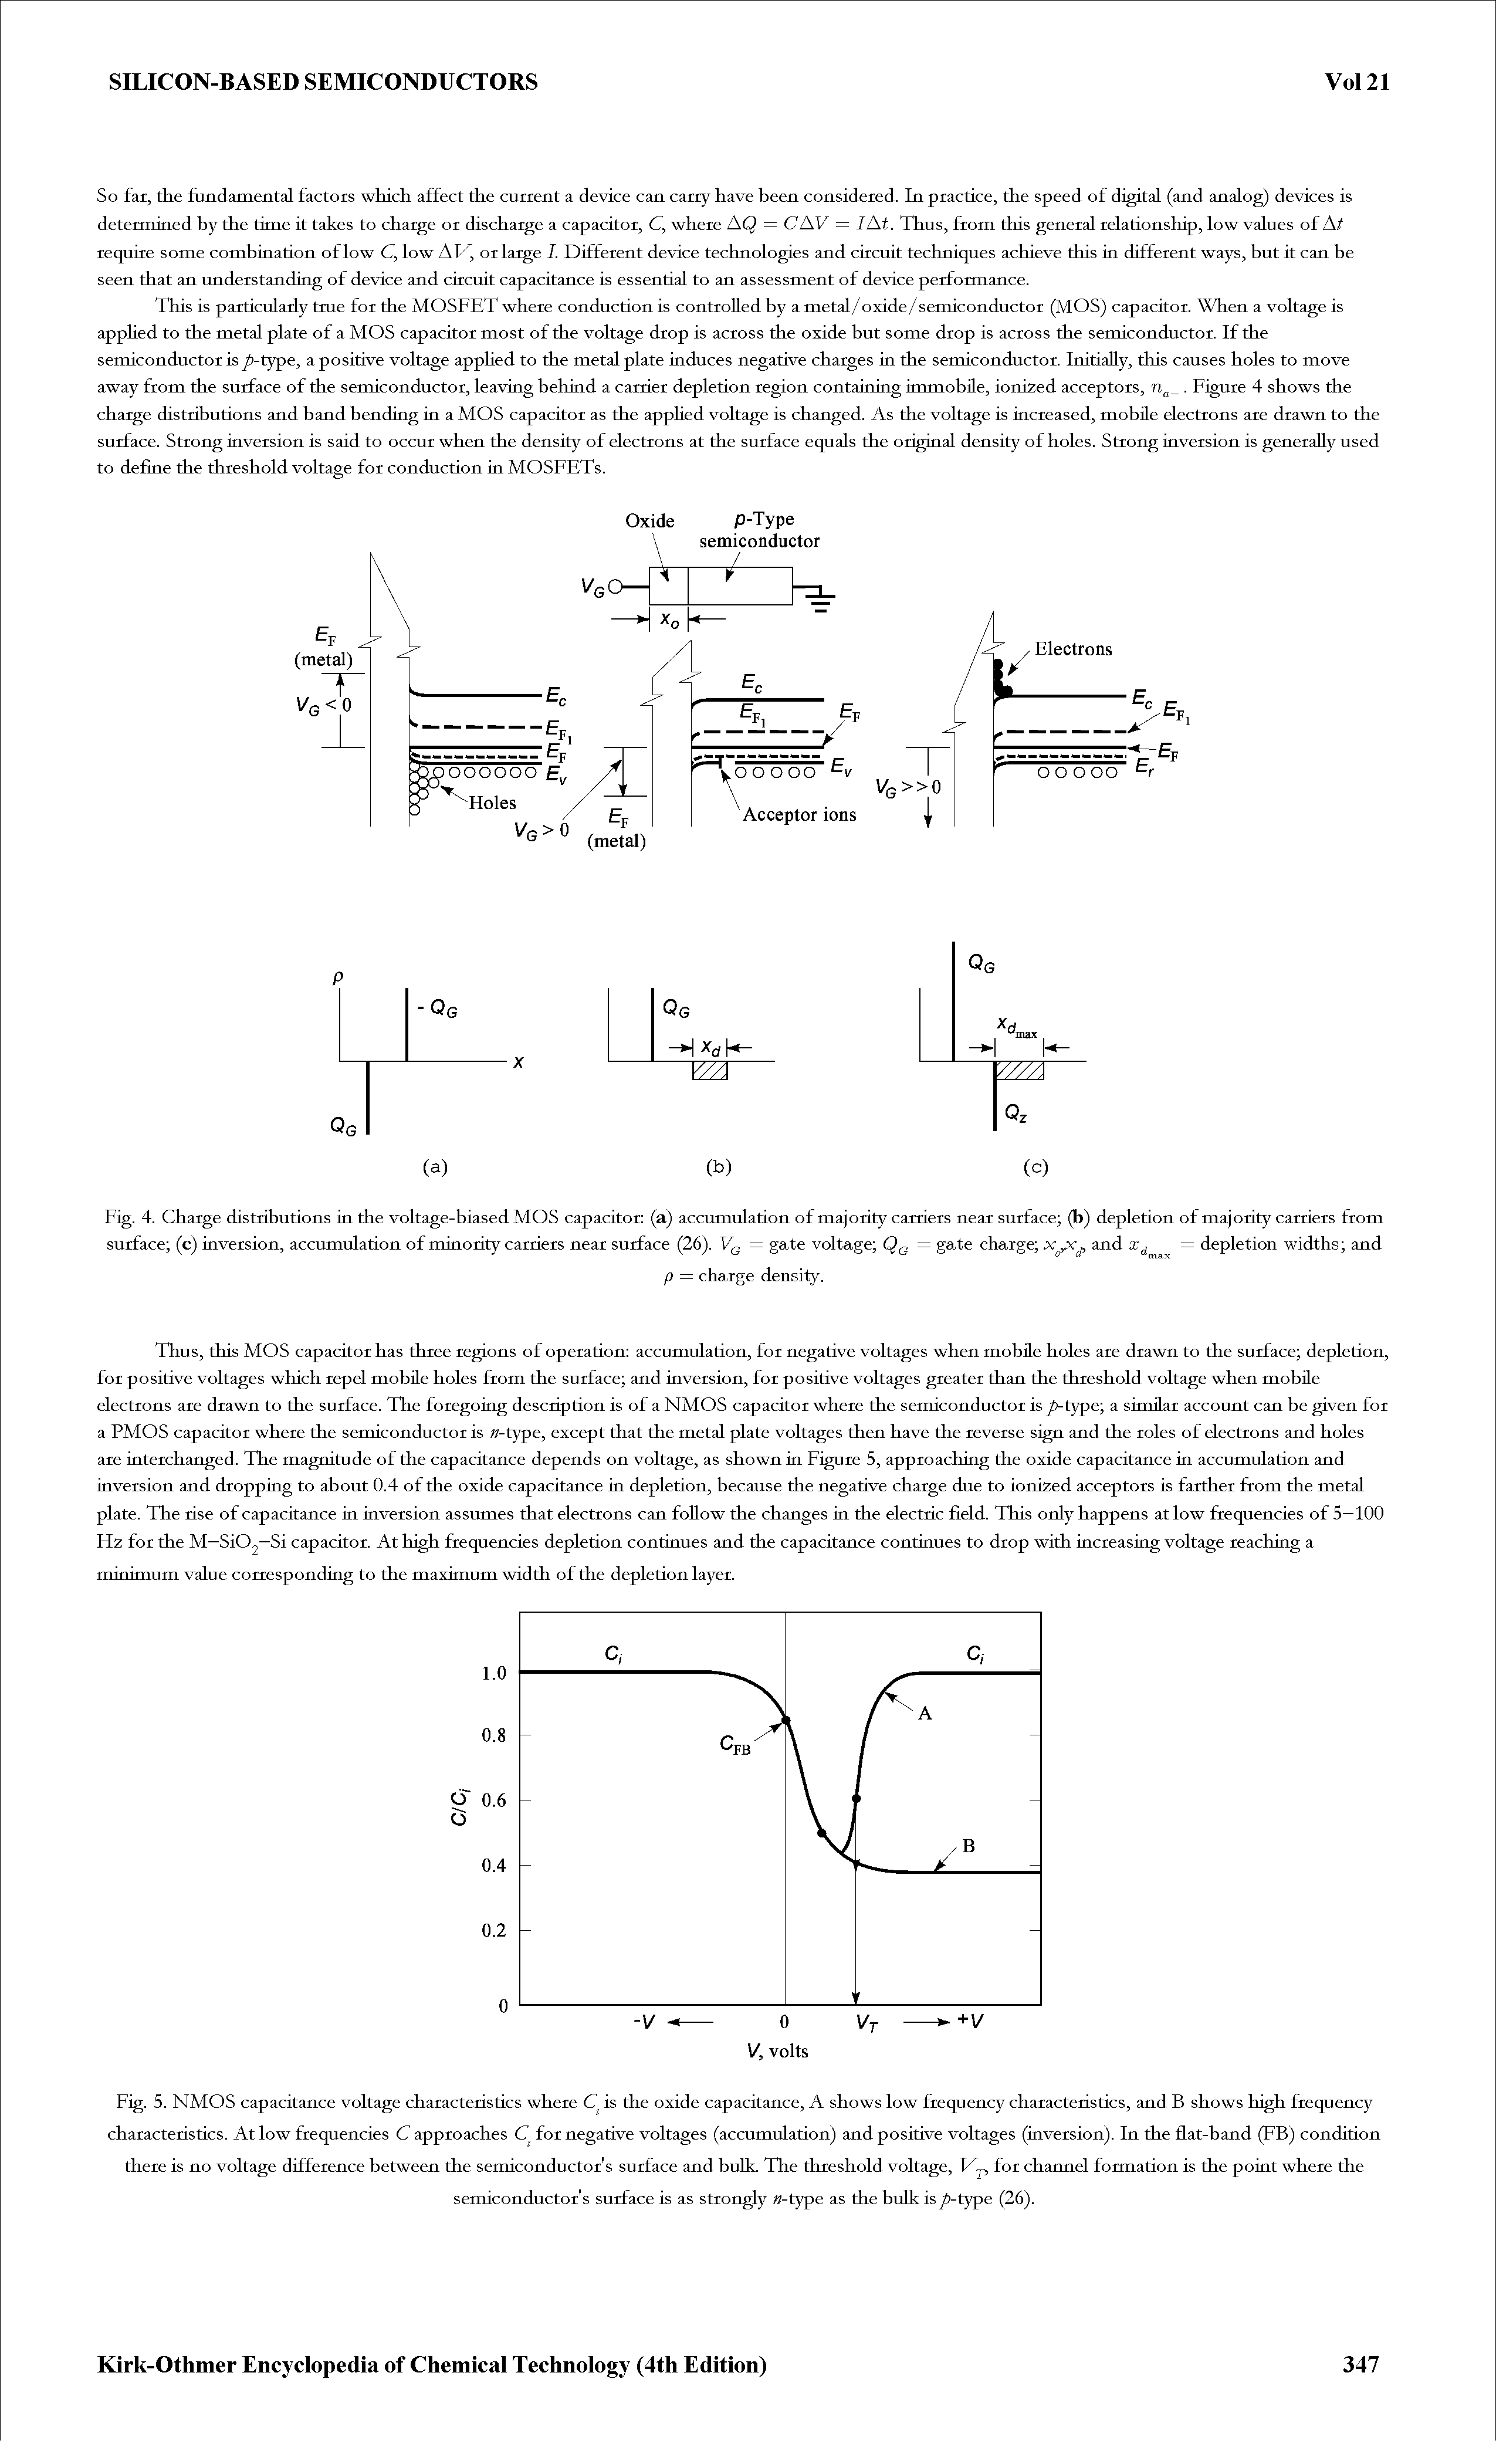 Fig. 5. NMOS capacitance voltage characteristics where C is the oxide capacitance, A shows low frequency characteristics, and B shows high frequency characteristics. At low frequencies C approaches C for negative voltages (accumulation) and positive voltages (inversion). In the flat-band (FB) condition there is no voltage difference between the semiconductor s surface and bulk. The threshold voltage, Dp for channel formation is the point where the...